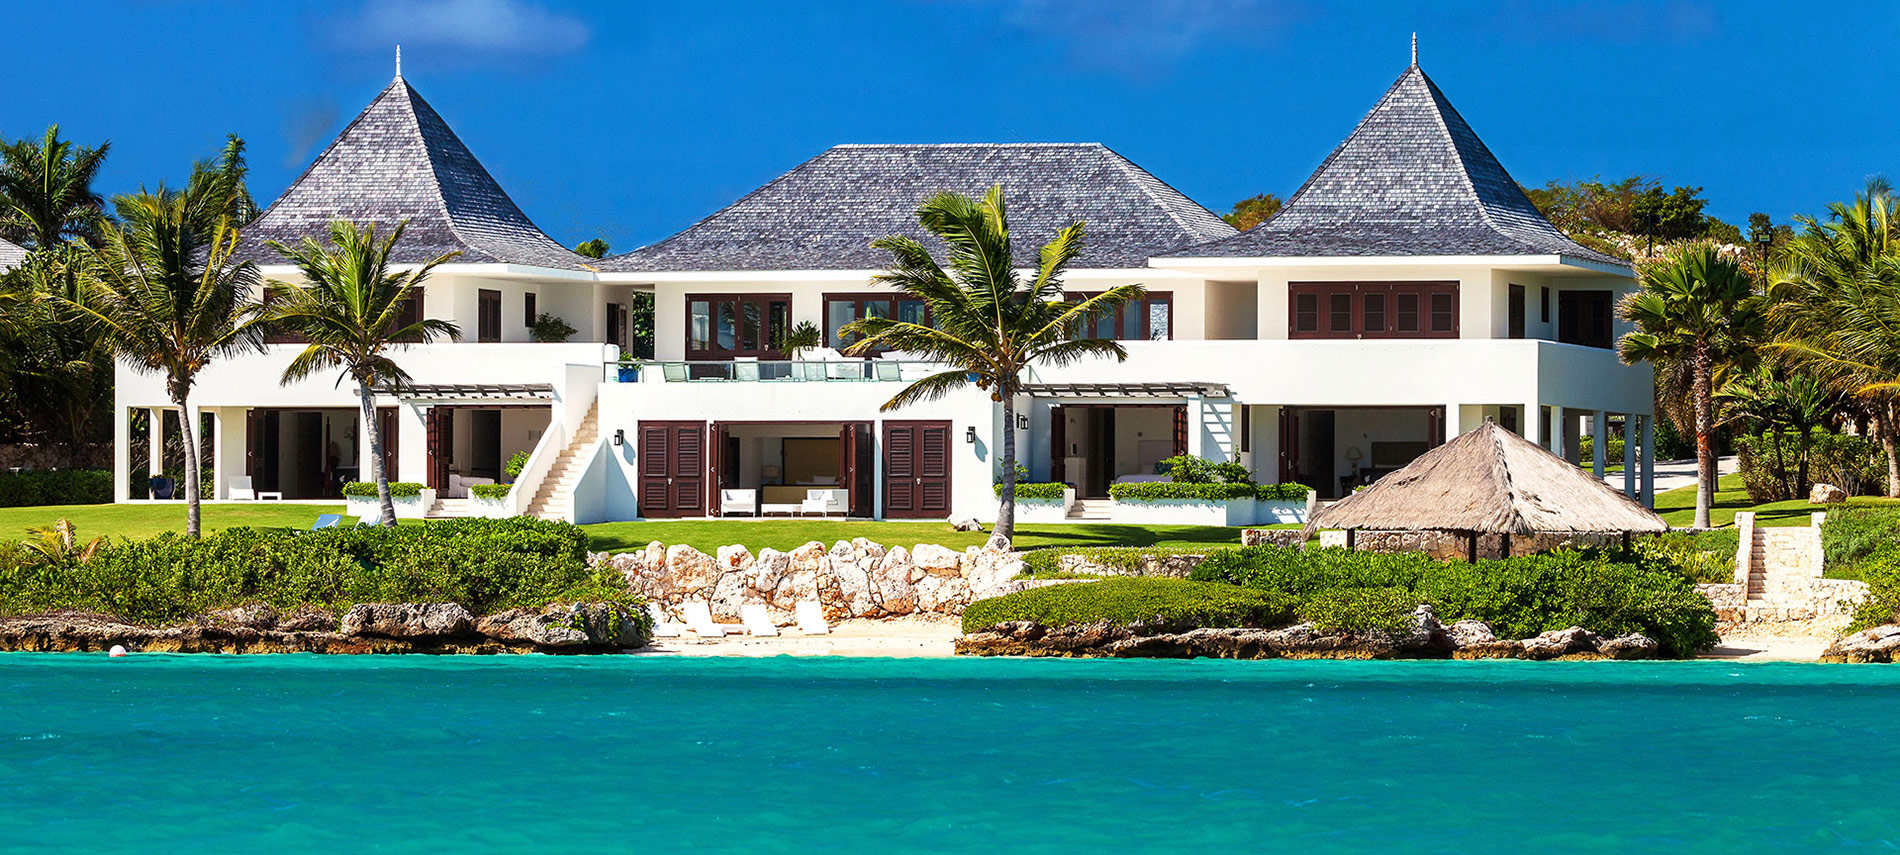 Overlooking the sparkling Caribbean, Le Bleu Villa is the pinnacle of luxury on Anguilla.